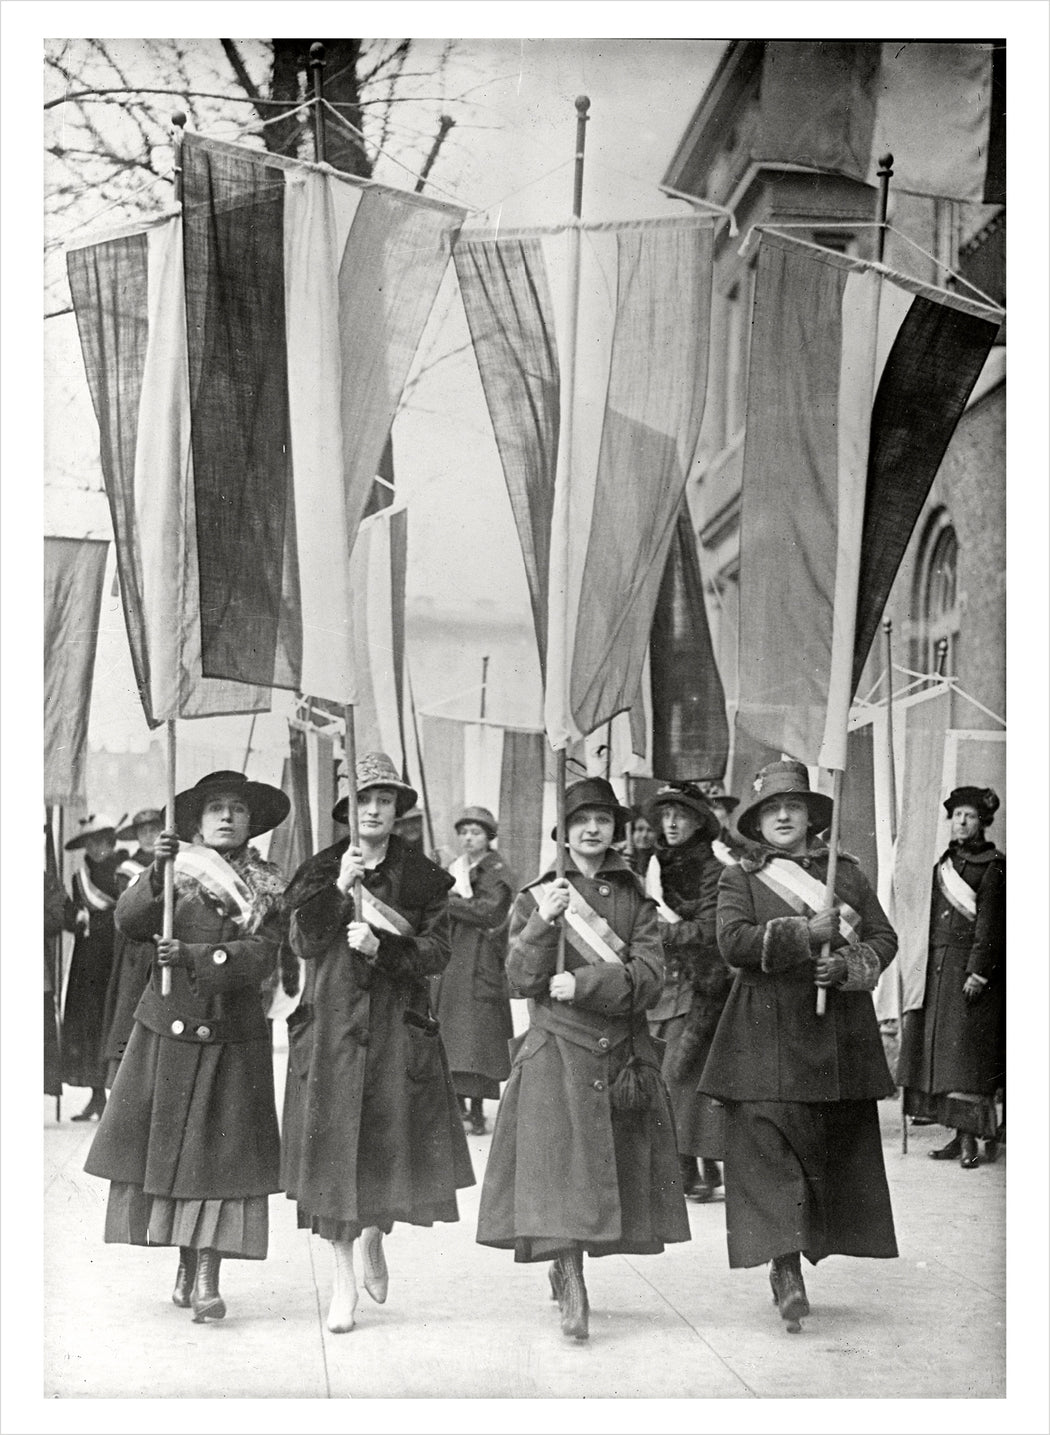 Votes for Women! The Suffrage Movement Book of Postcards_Interior_4